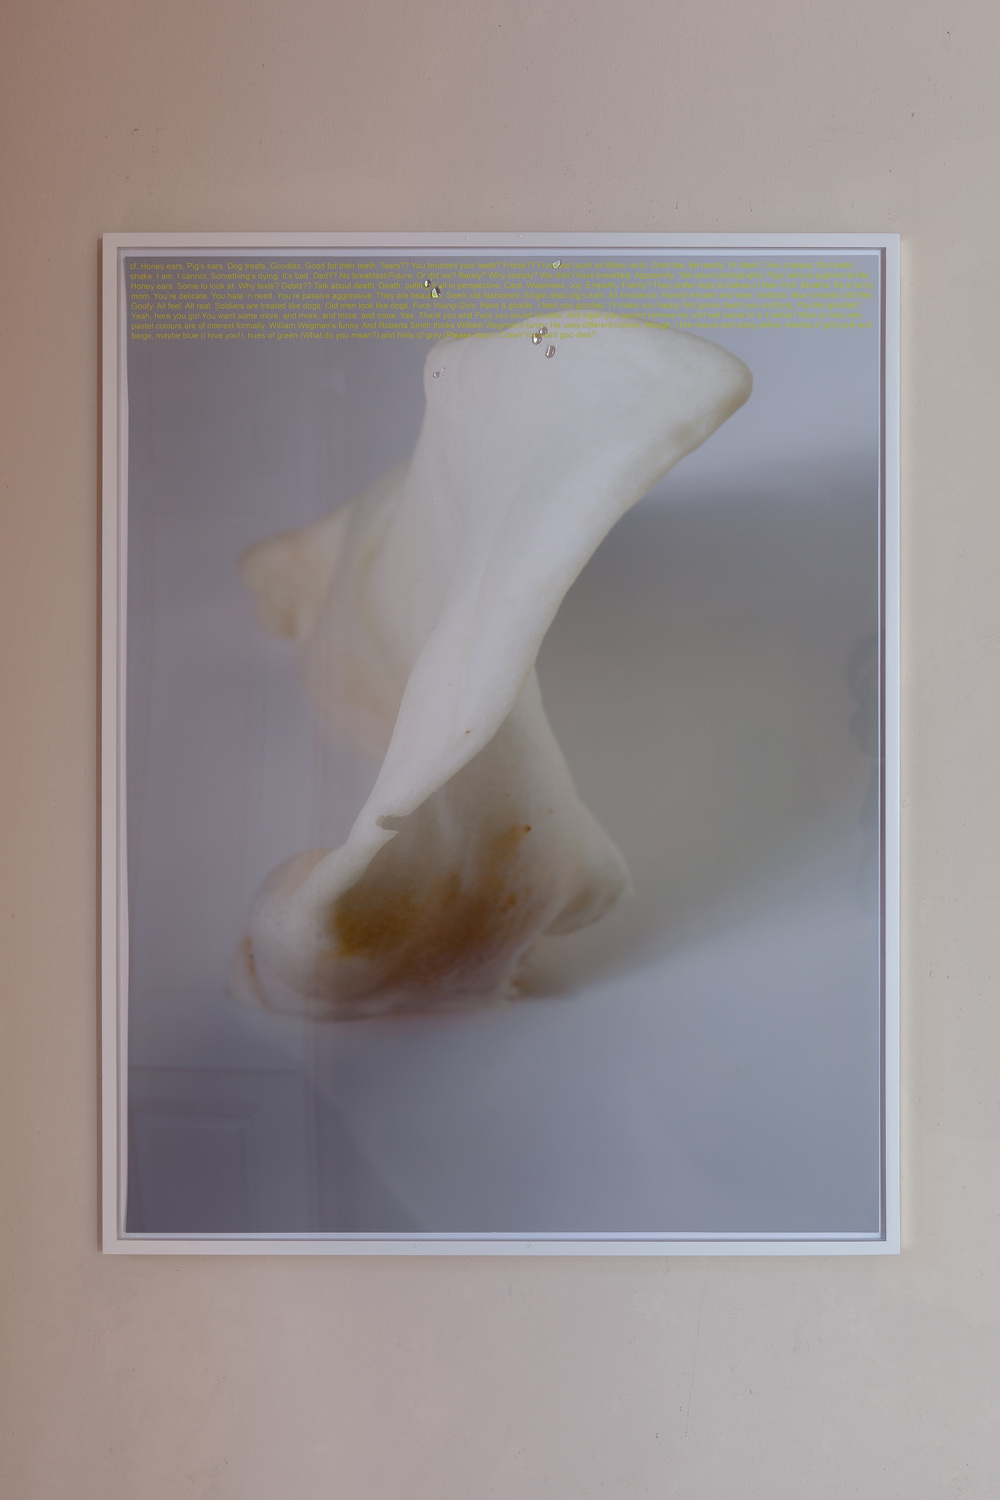 Lisa HolzerInducement, 2016Pigment print on cotton paper, Crystal Clear polyurethane on glass92 x 72 cm